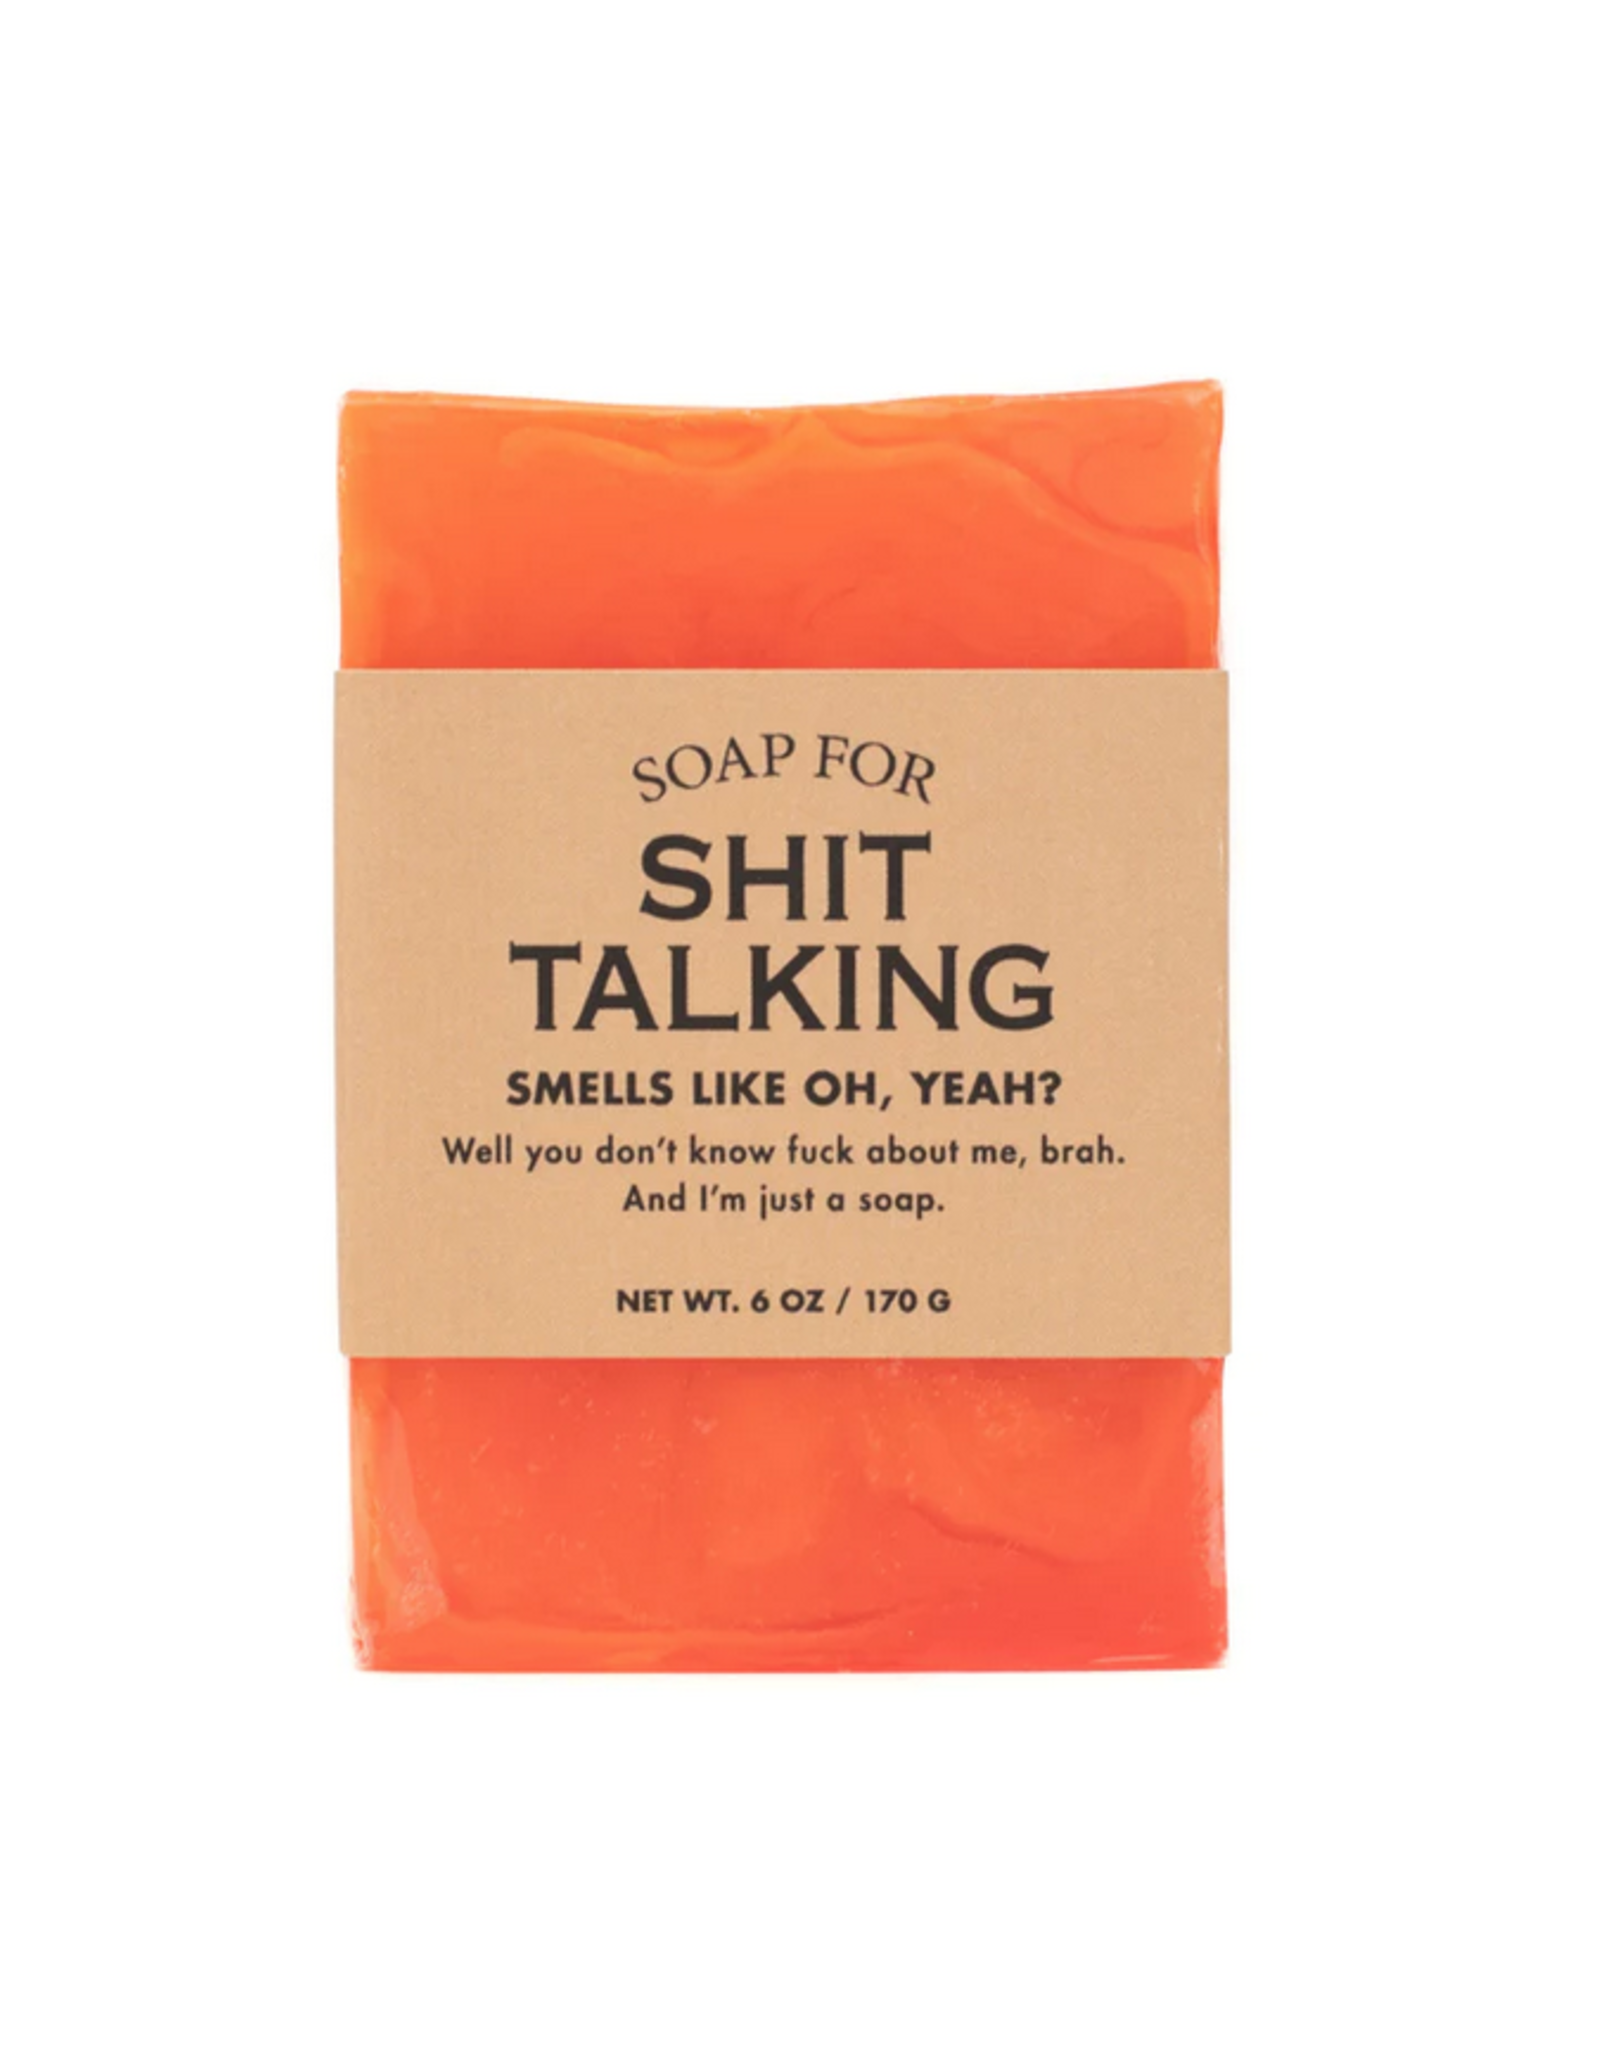 A Soap for Shit Talking